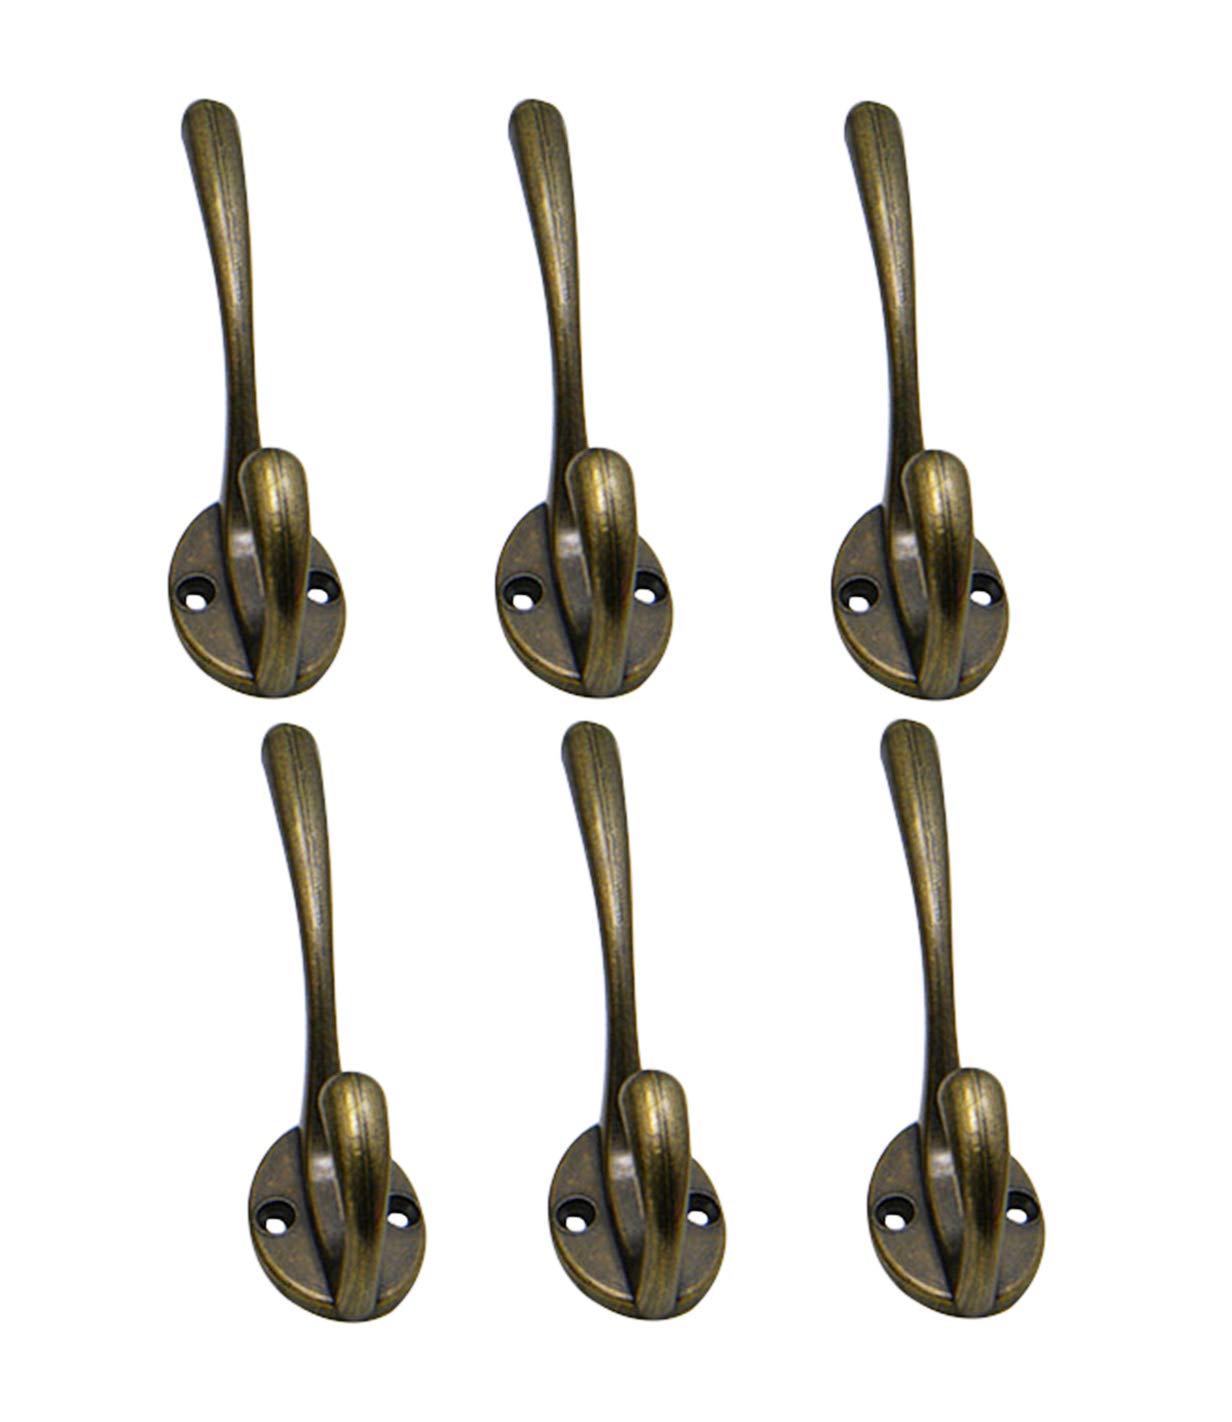 6 Pack Antique Scroll Coat Hooks Old Bronze Wall Mount (Screws Included) Double Prong Hat Hook Hanger for Closet Door Wall Hanging